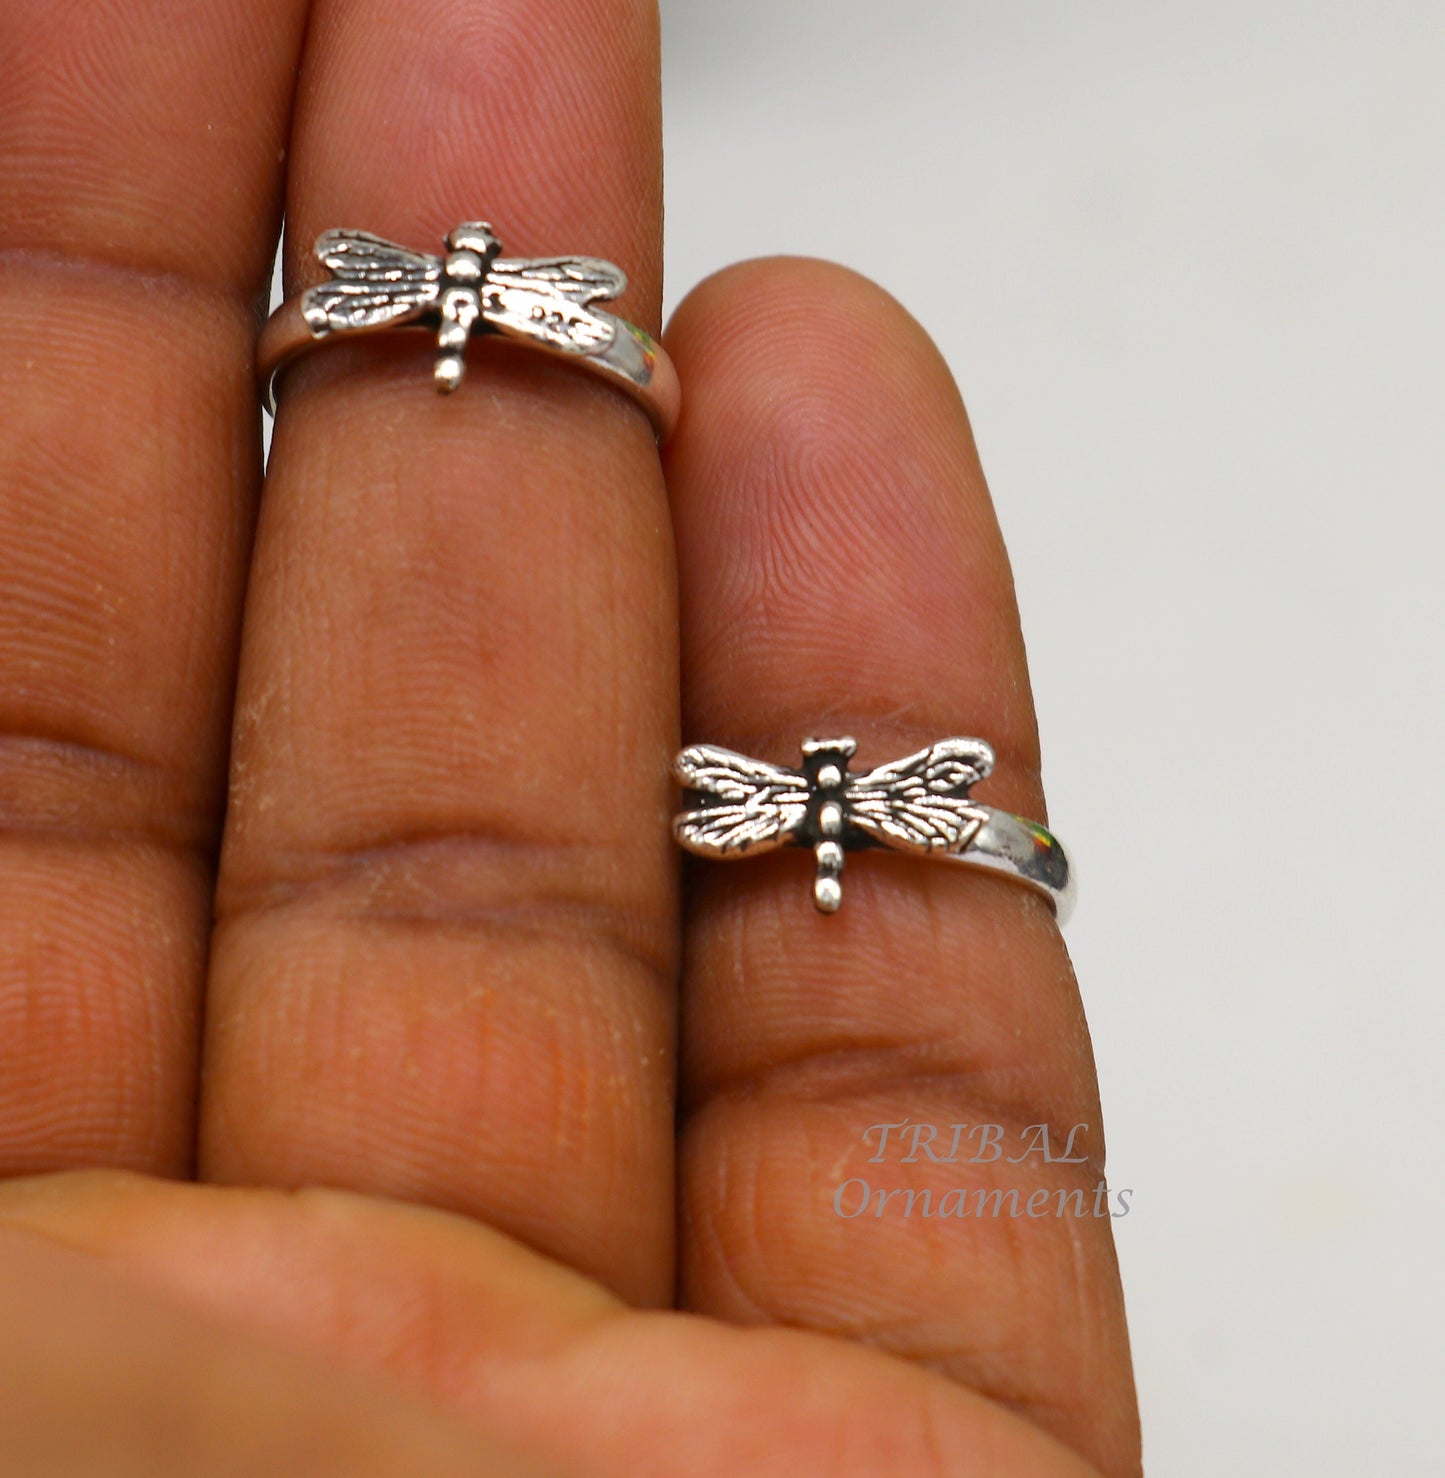 925 sterling silver handmade fabulous butterfly design toe ring band tribal belly dance vintage style ethnic jewelry ytr39 - TRIBAL ORNAMENTS